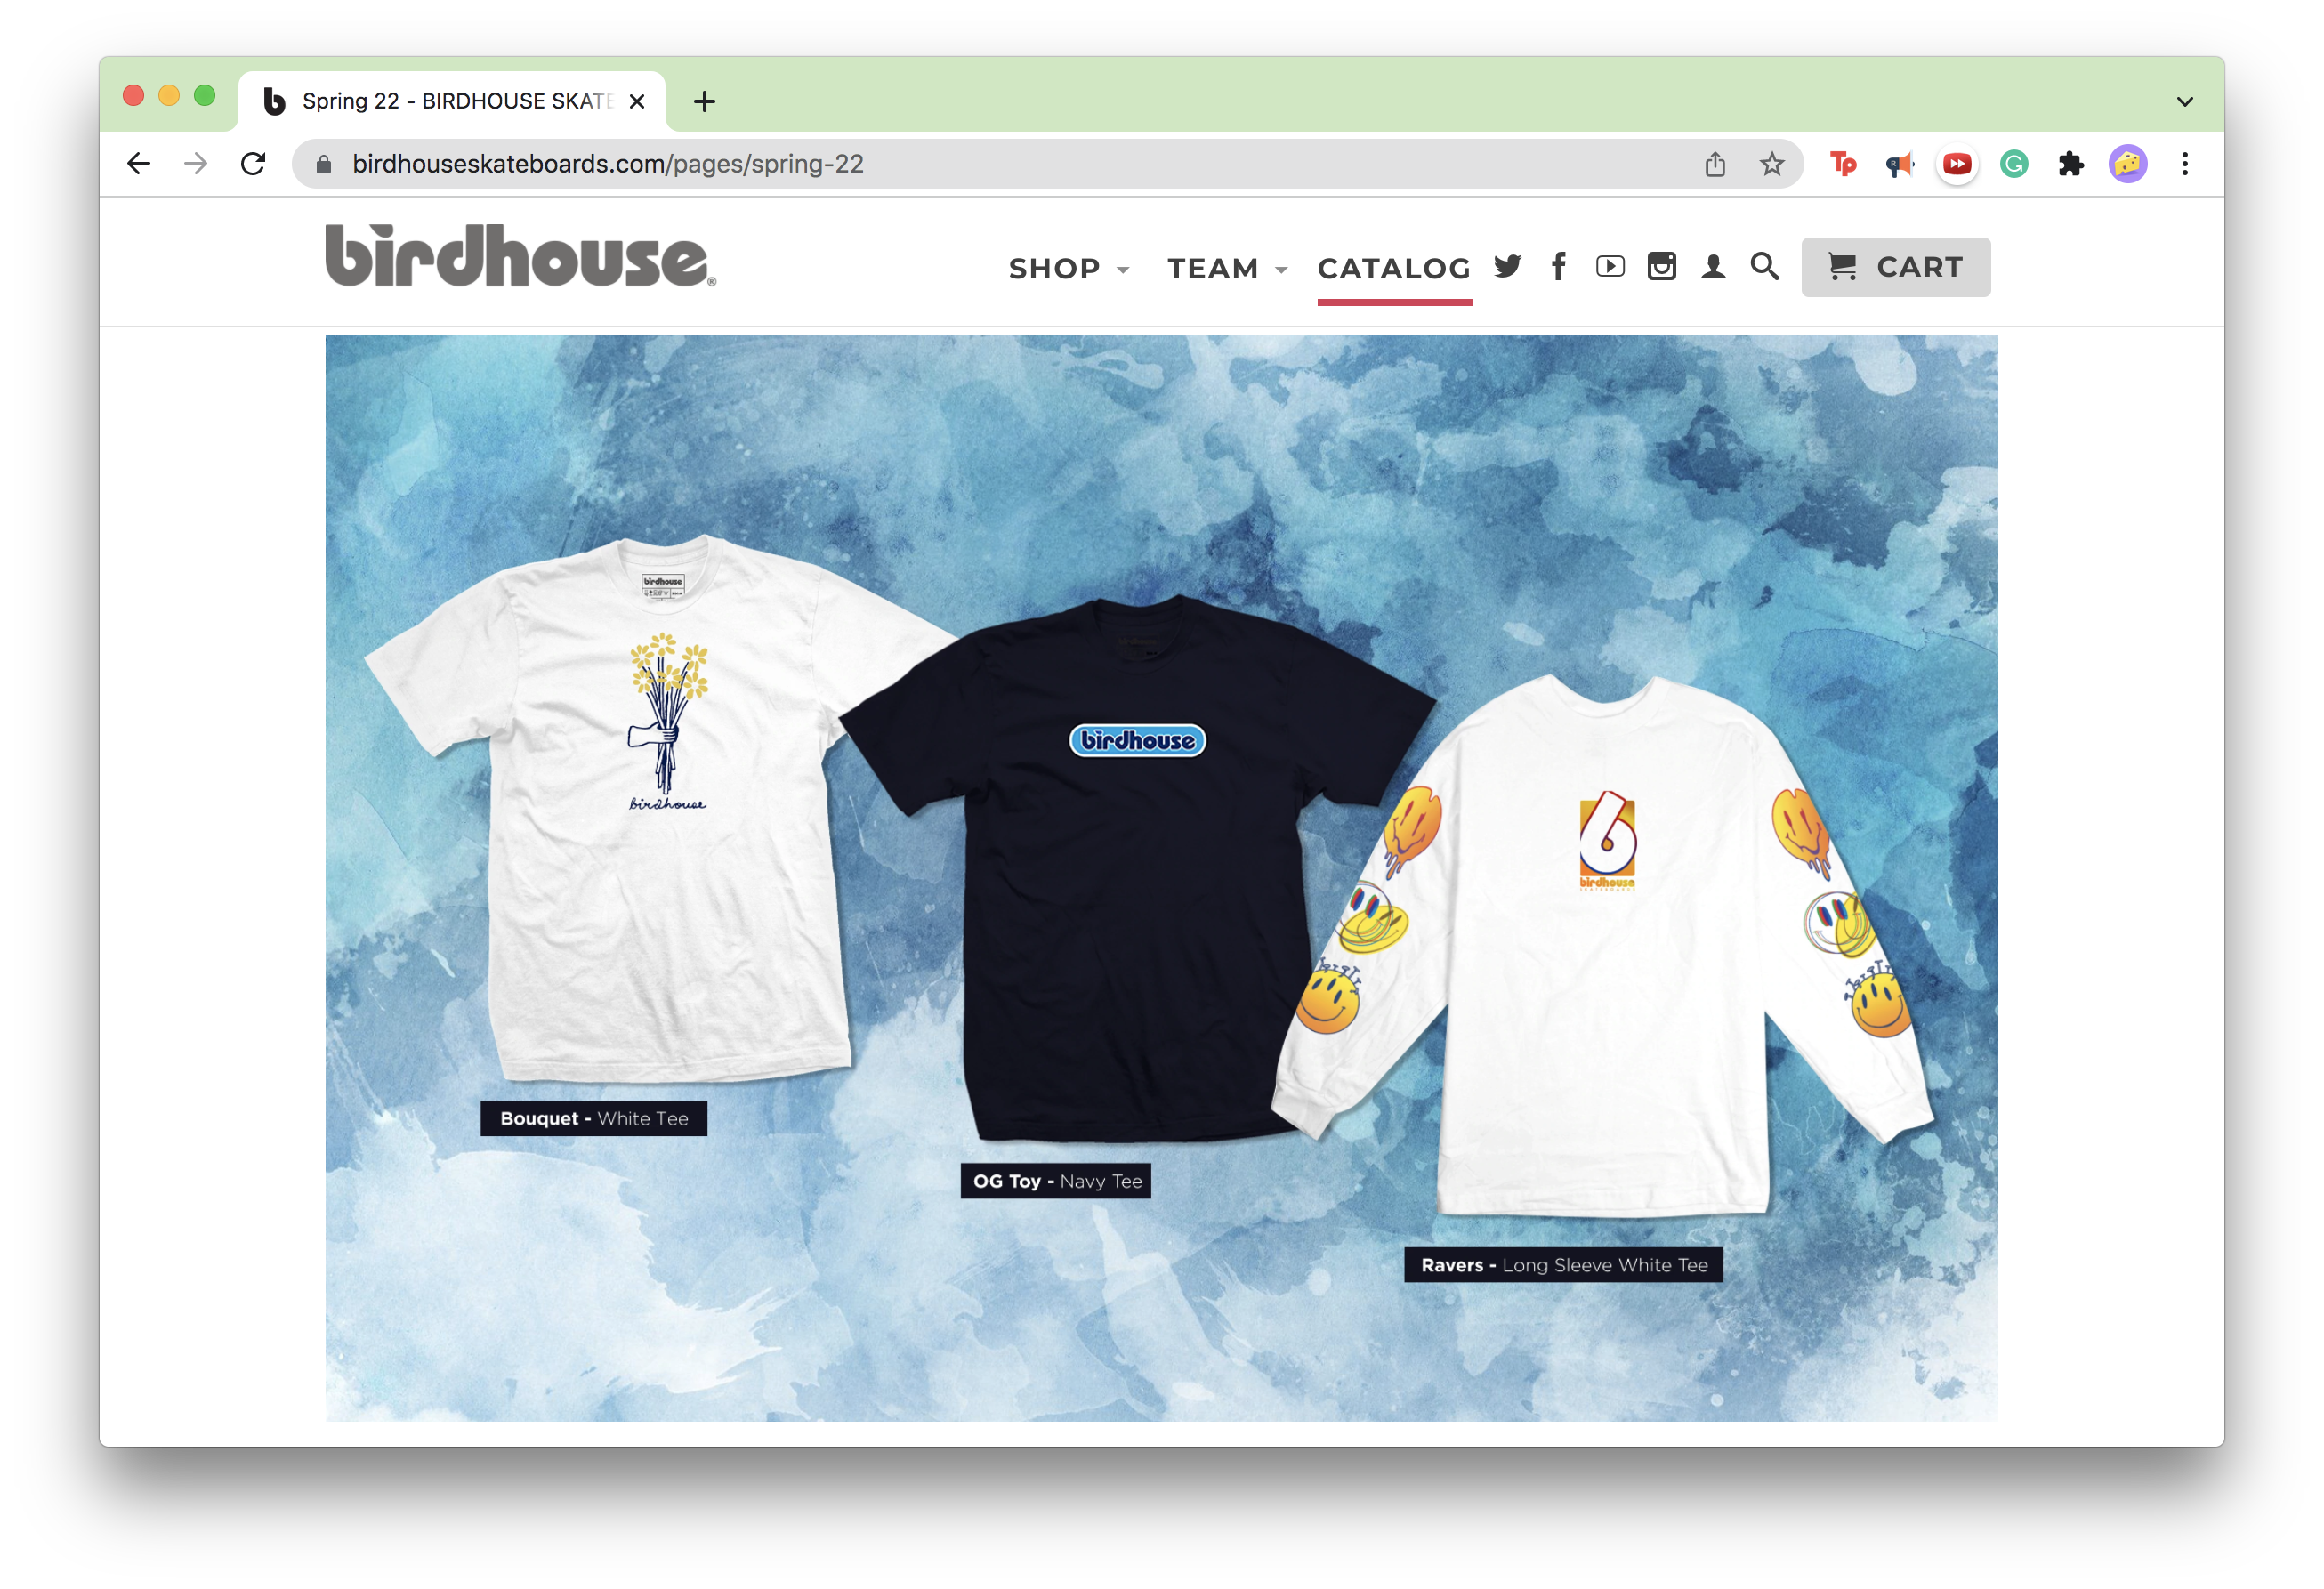 Screenshot of the catalog page of the Birdhouse website.